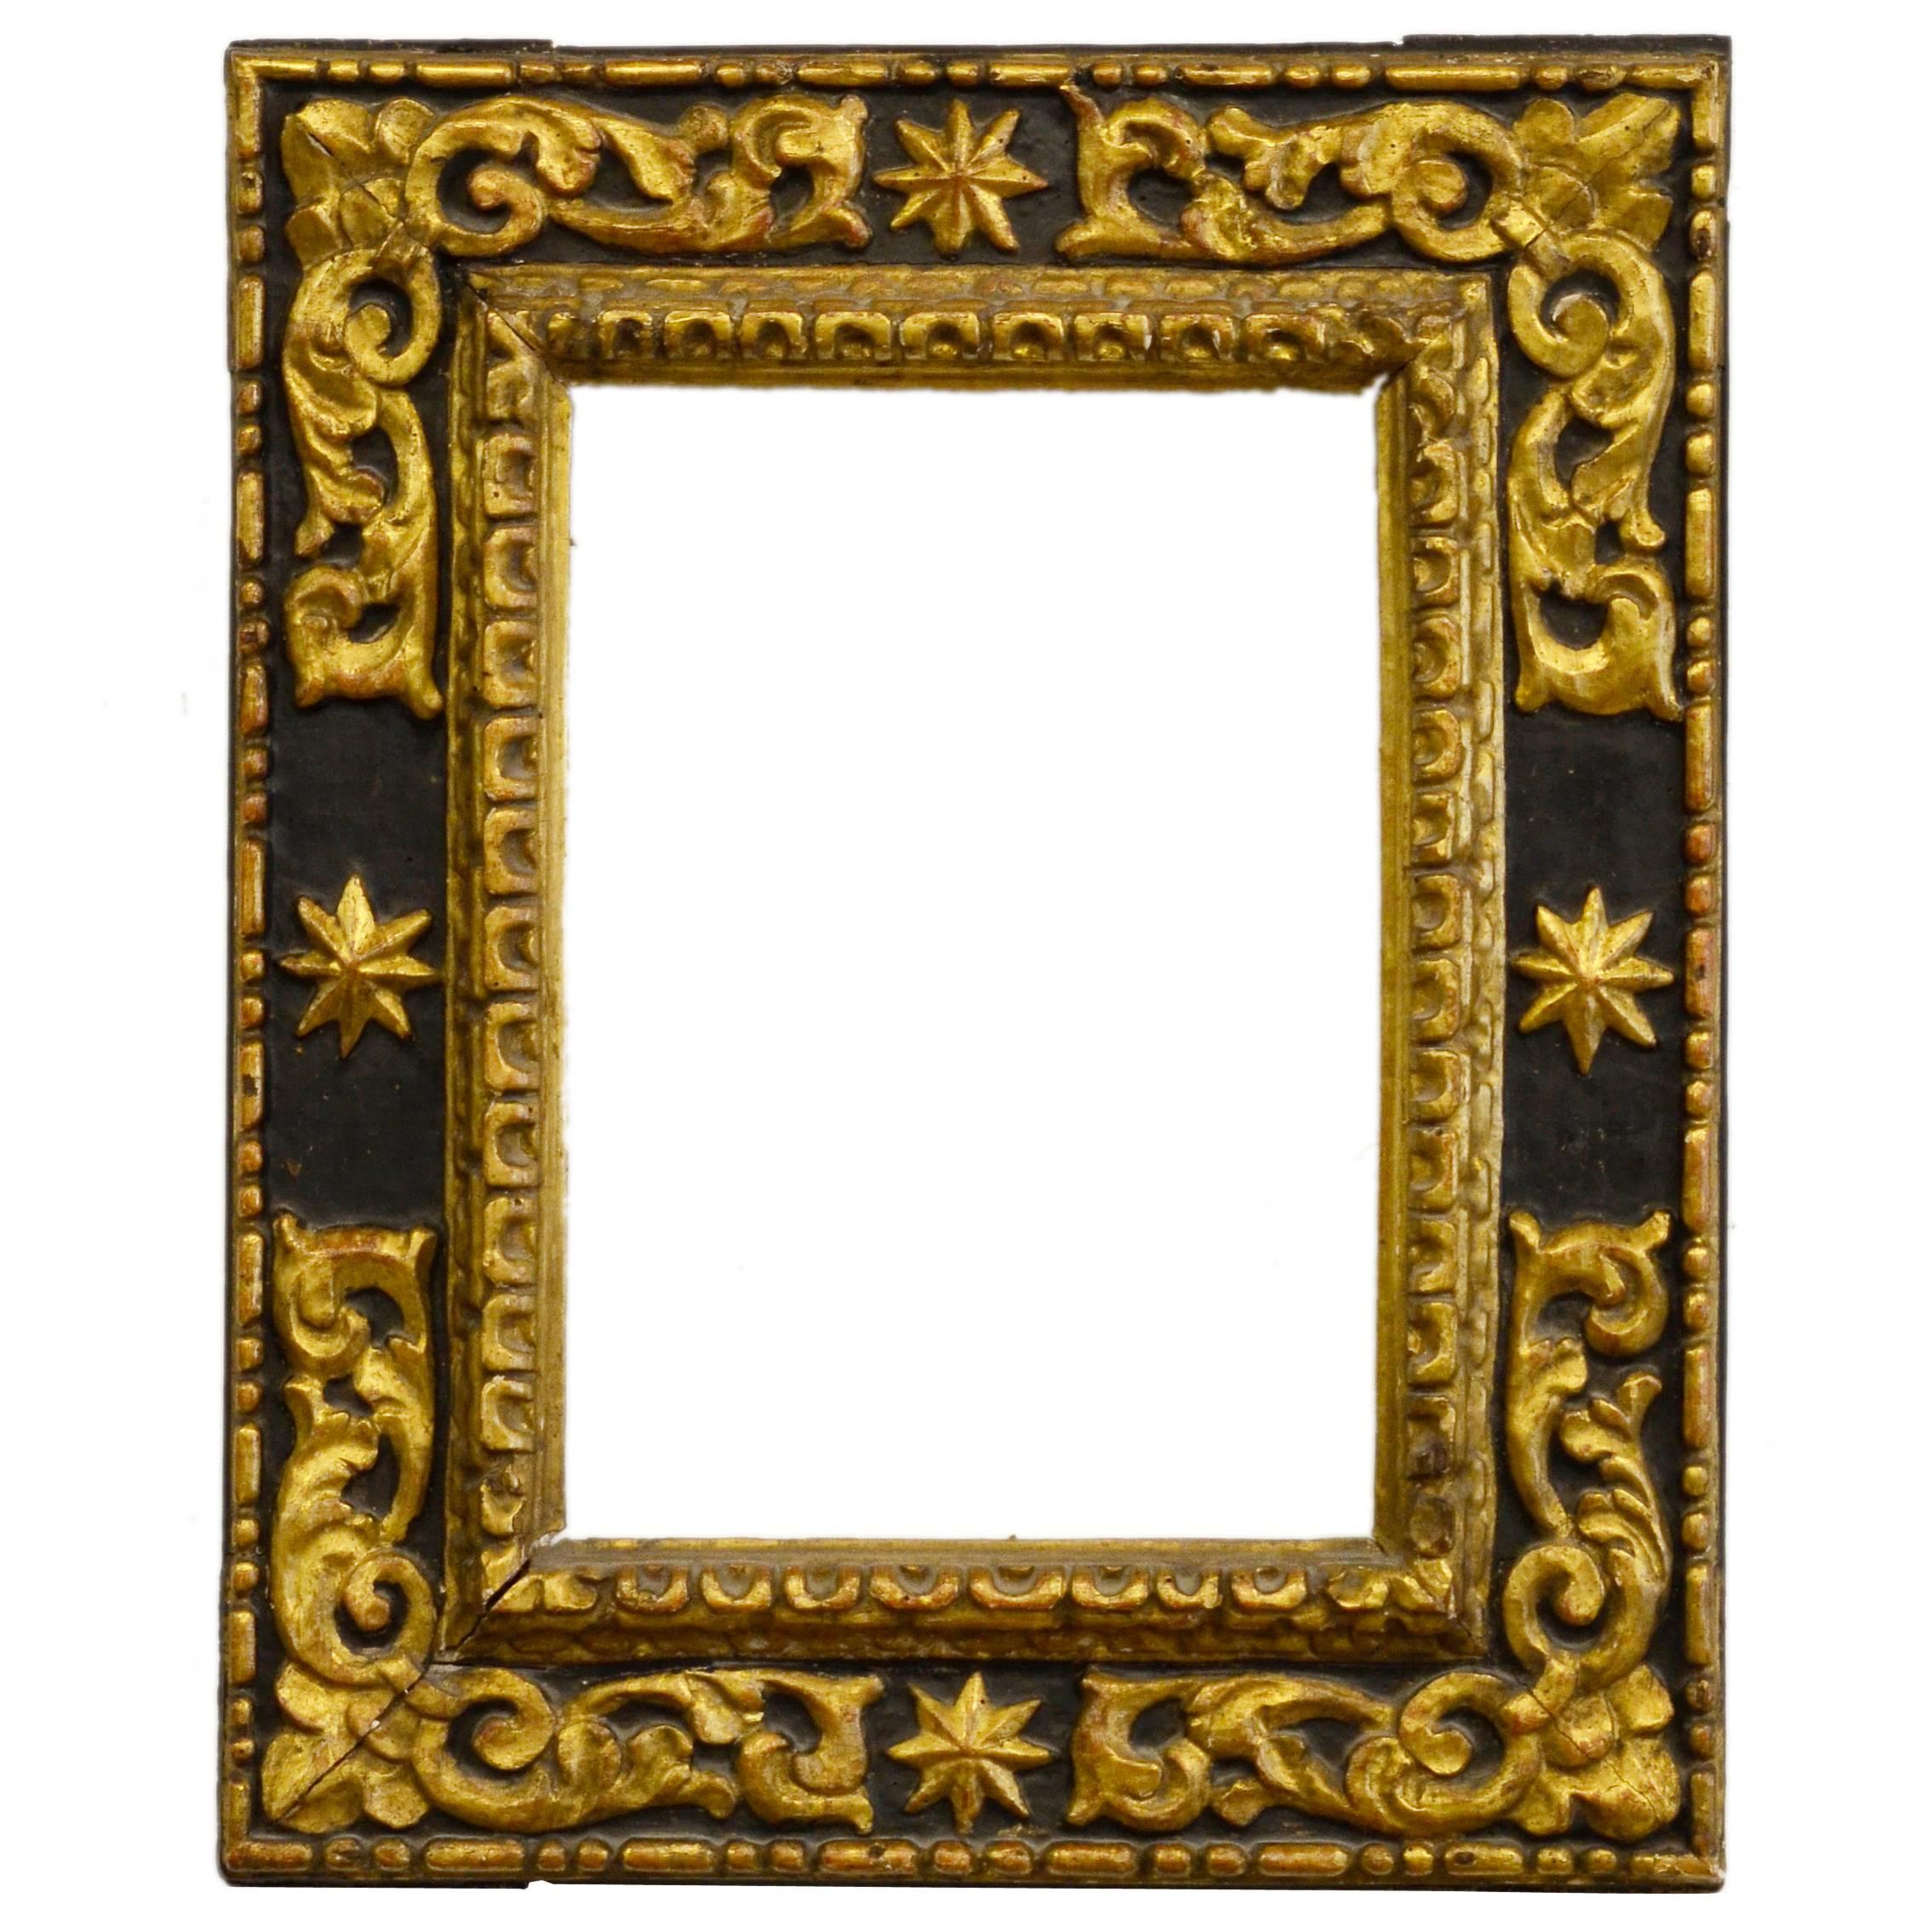 Spanish Giltwood Sacristy Frame with Later Mercury Mirror Plate Mid-17th Century For Sale